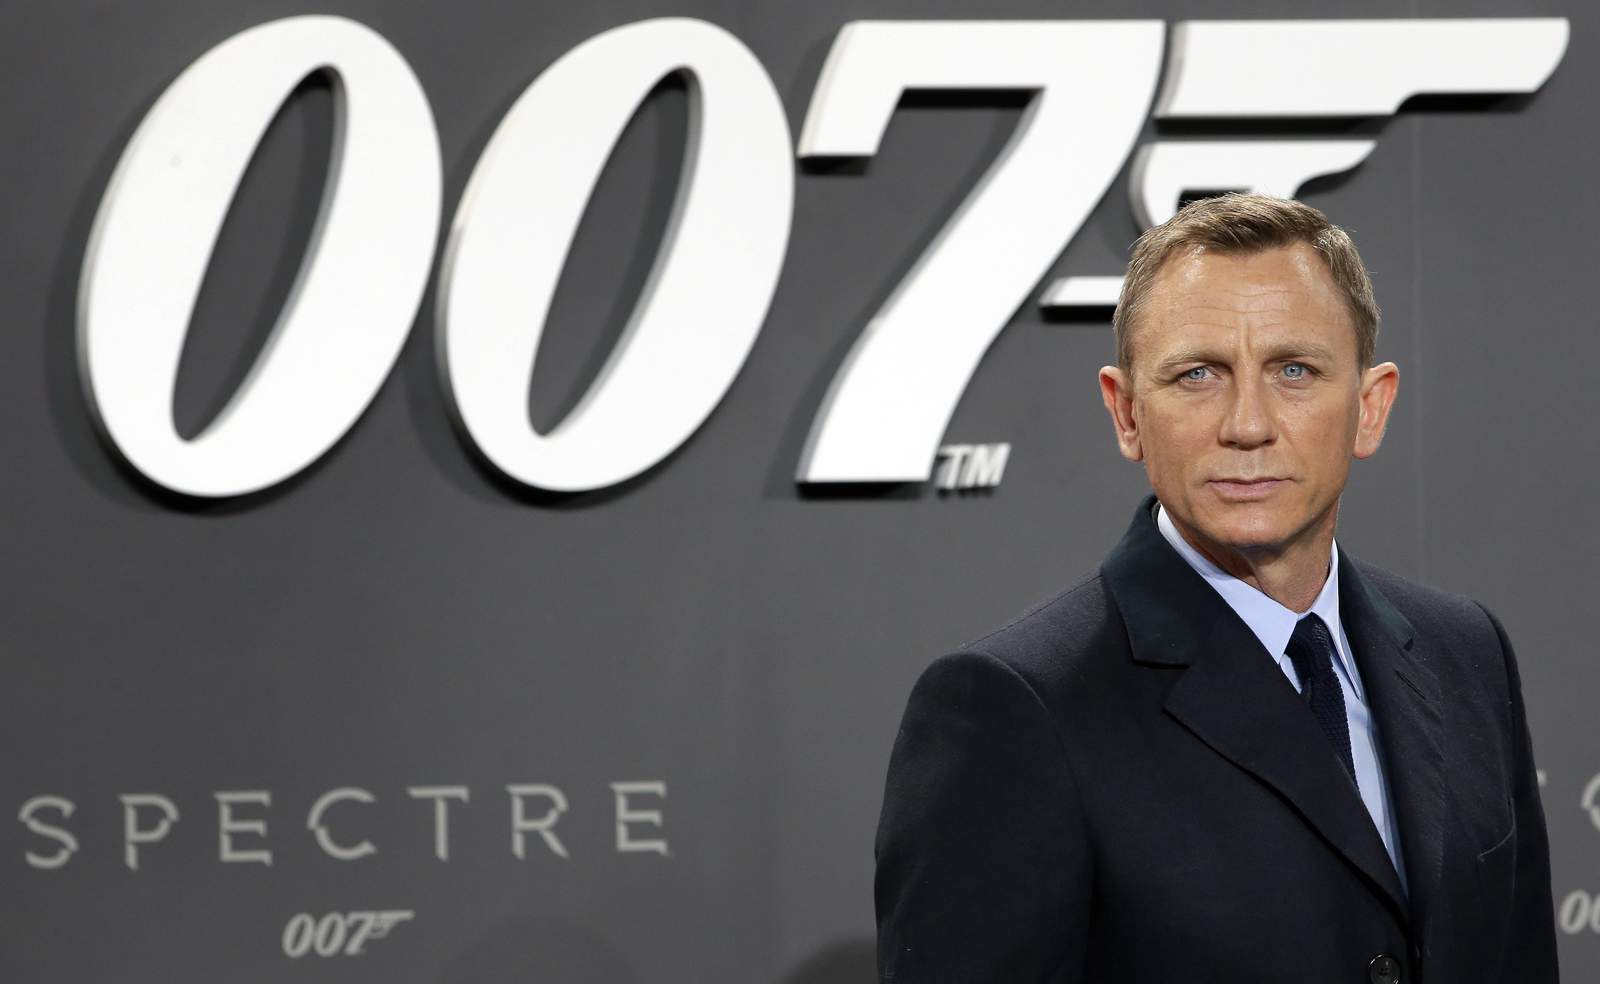 James Bond film ‘No Time To Die’ pushed again, to 2021